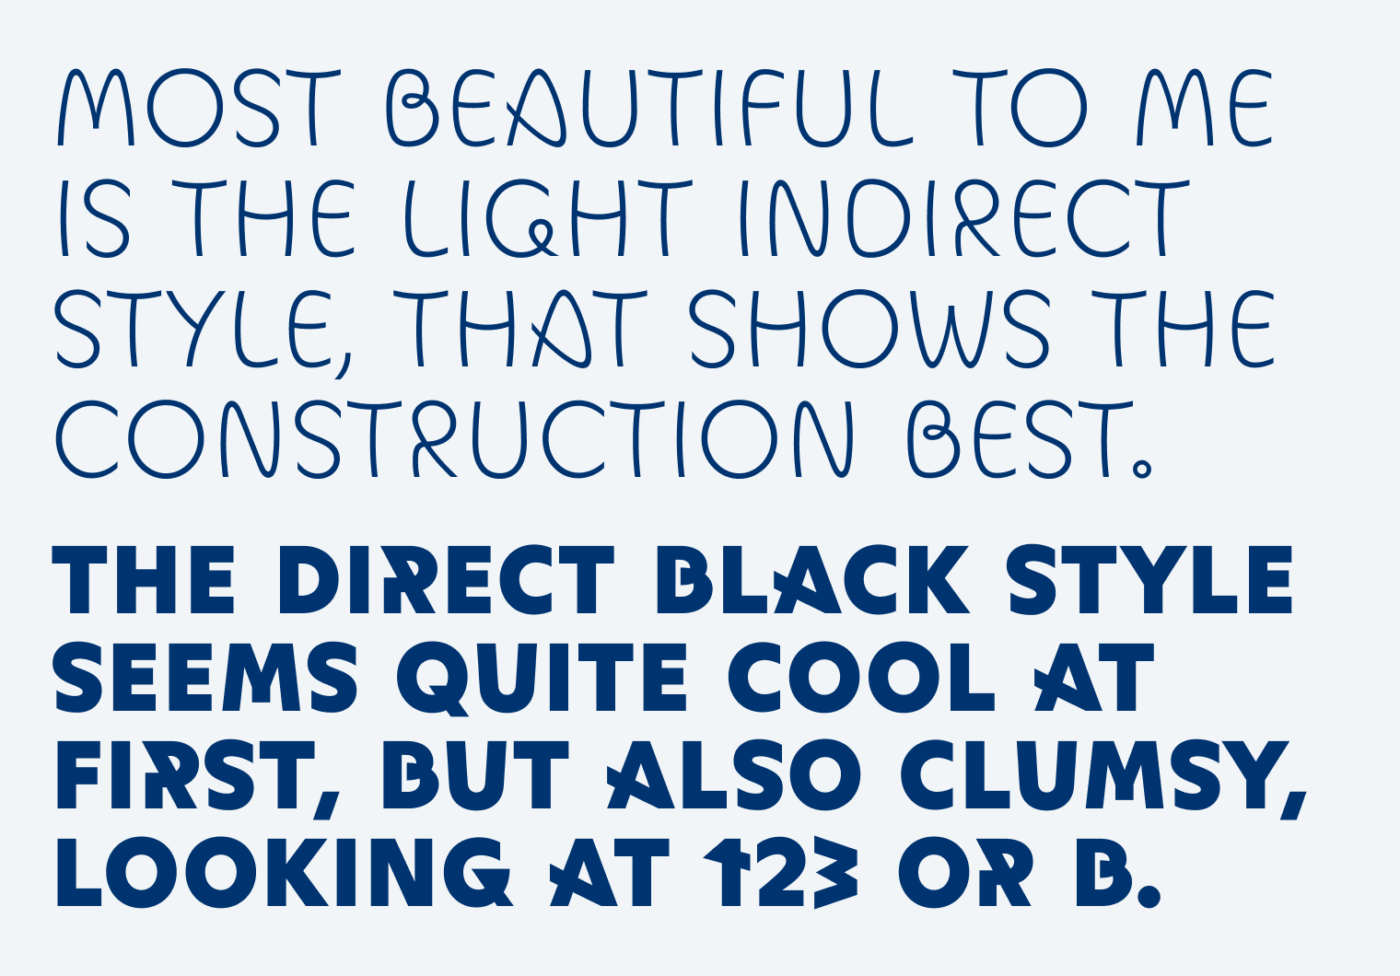 Most beautiful to me is the light indirect Style, that shows the construction best. The Direct Black style seems quite cool at first, but also clumsy, looking at 123 or B.